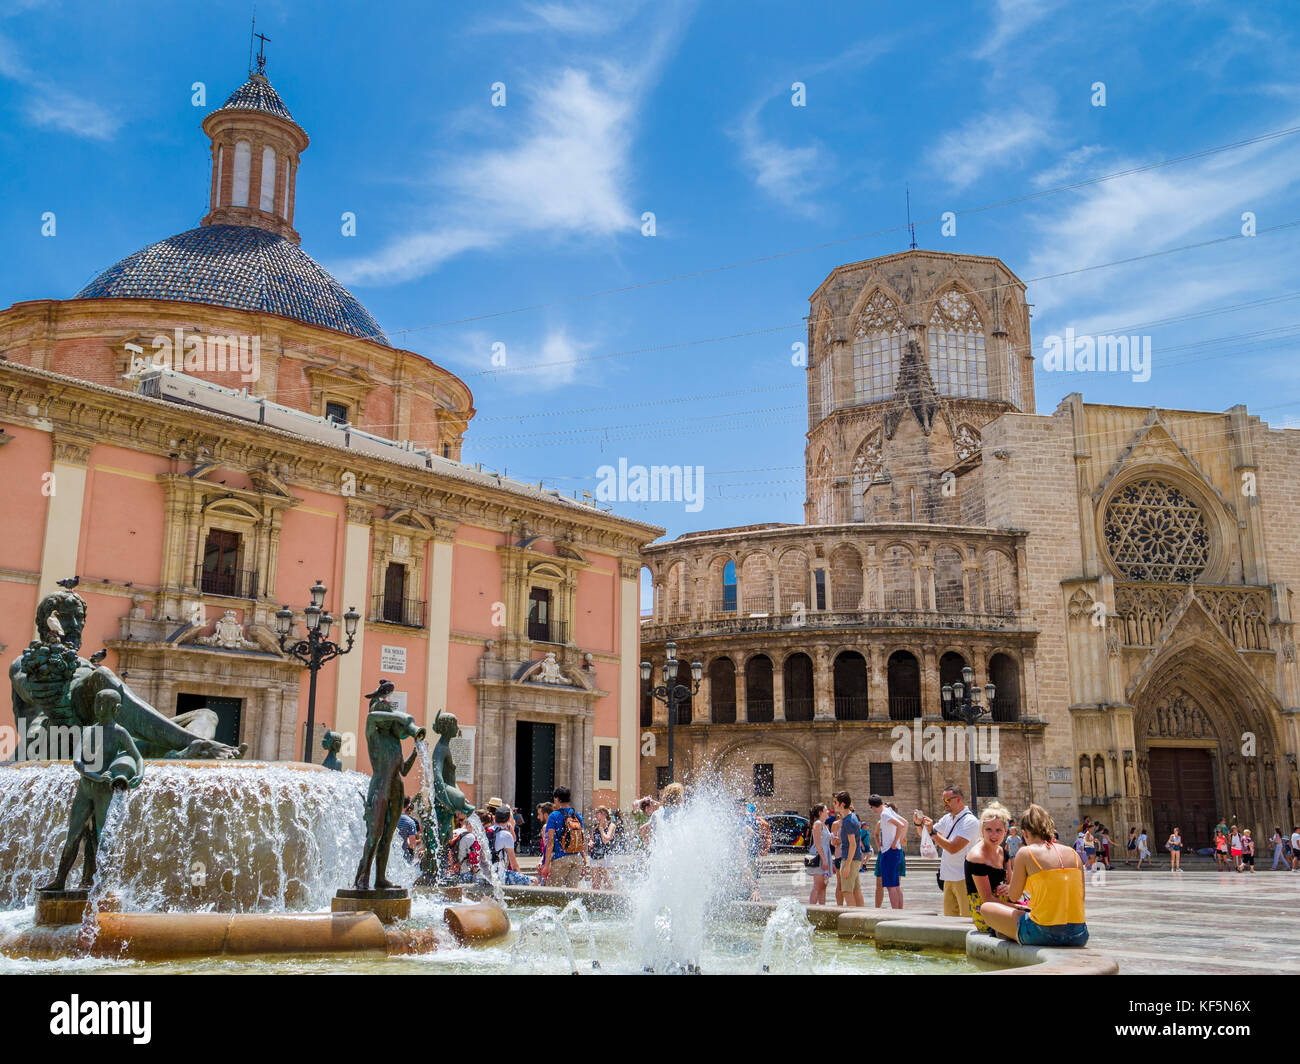 Tourists sightseeing by Turia fountain in la Plaza de la Virgen situated by the Cathedral (right) and  Basilica Virgen de los Desamparados, Valencia Stock Photo